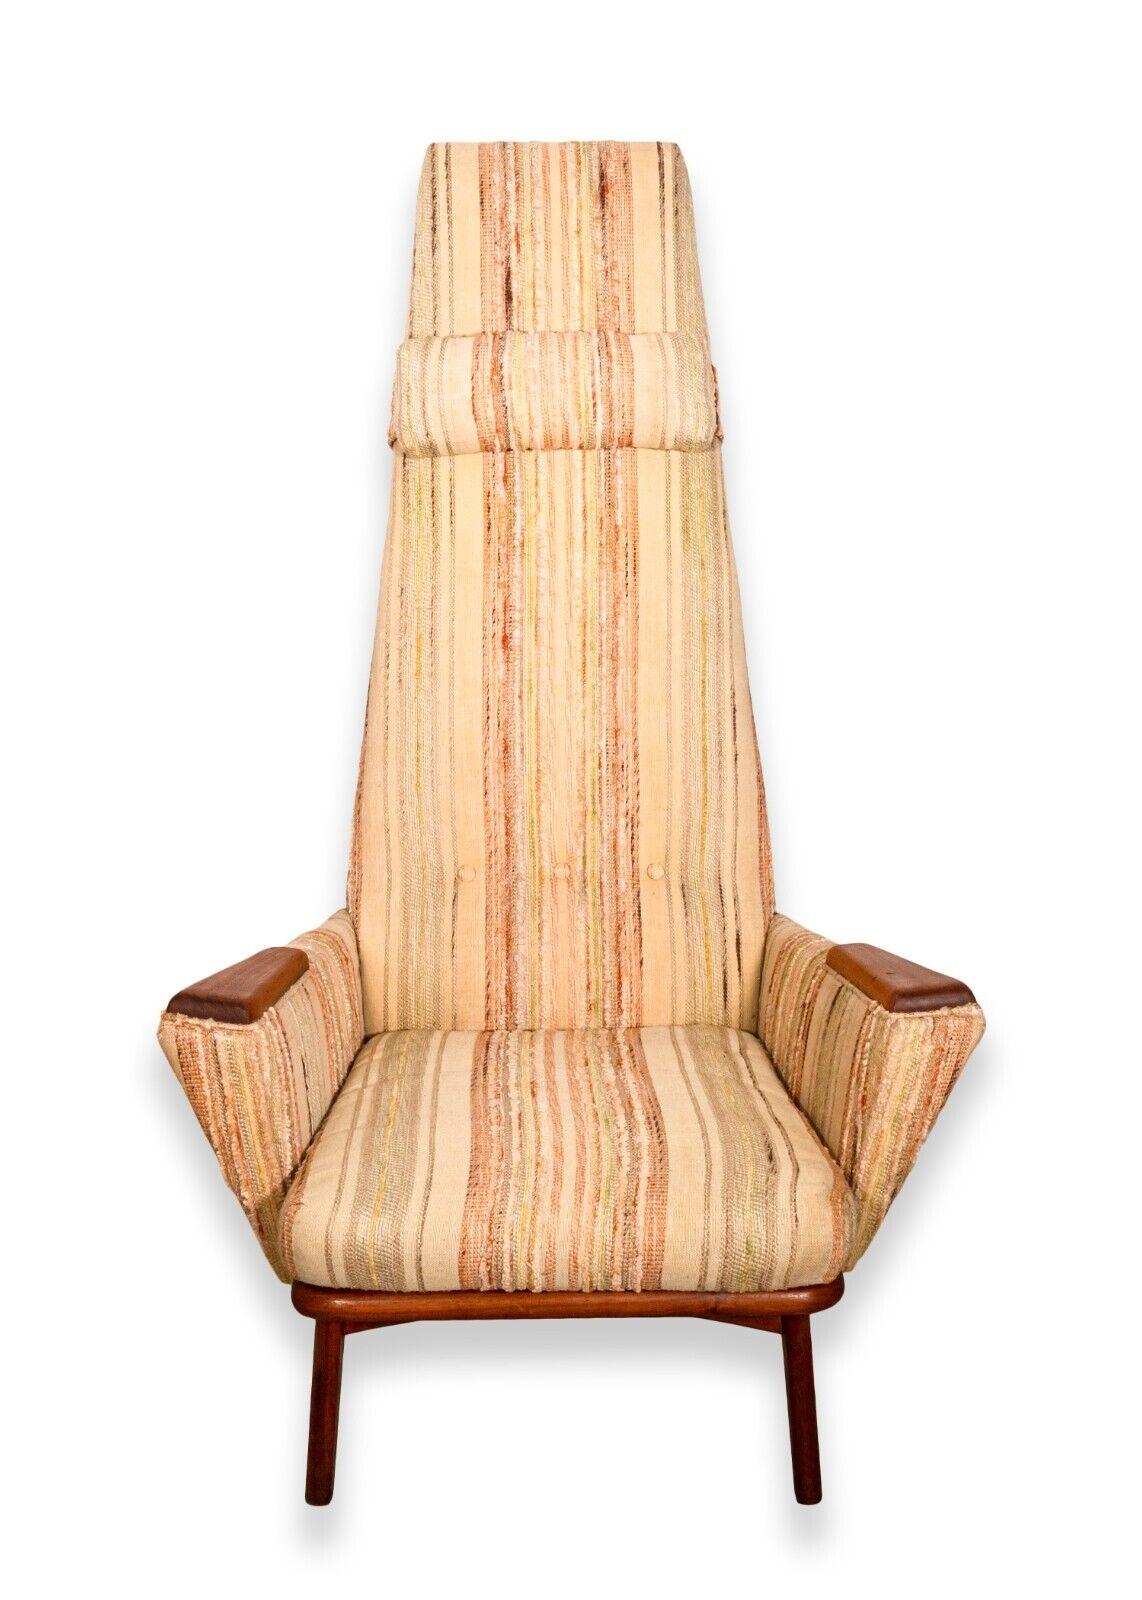 An Adrian Pearsall for Craft Slim Jim accent chair. A wonderful whimsical mid century modern piece of furniture from the great mind of Adrian Pearsall. The 